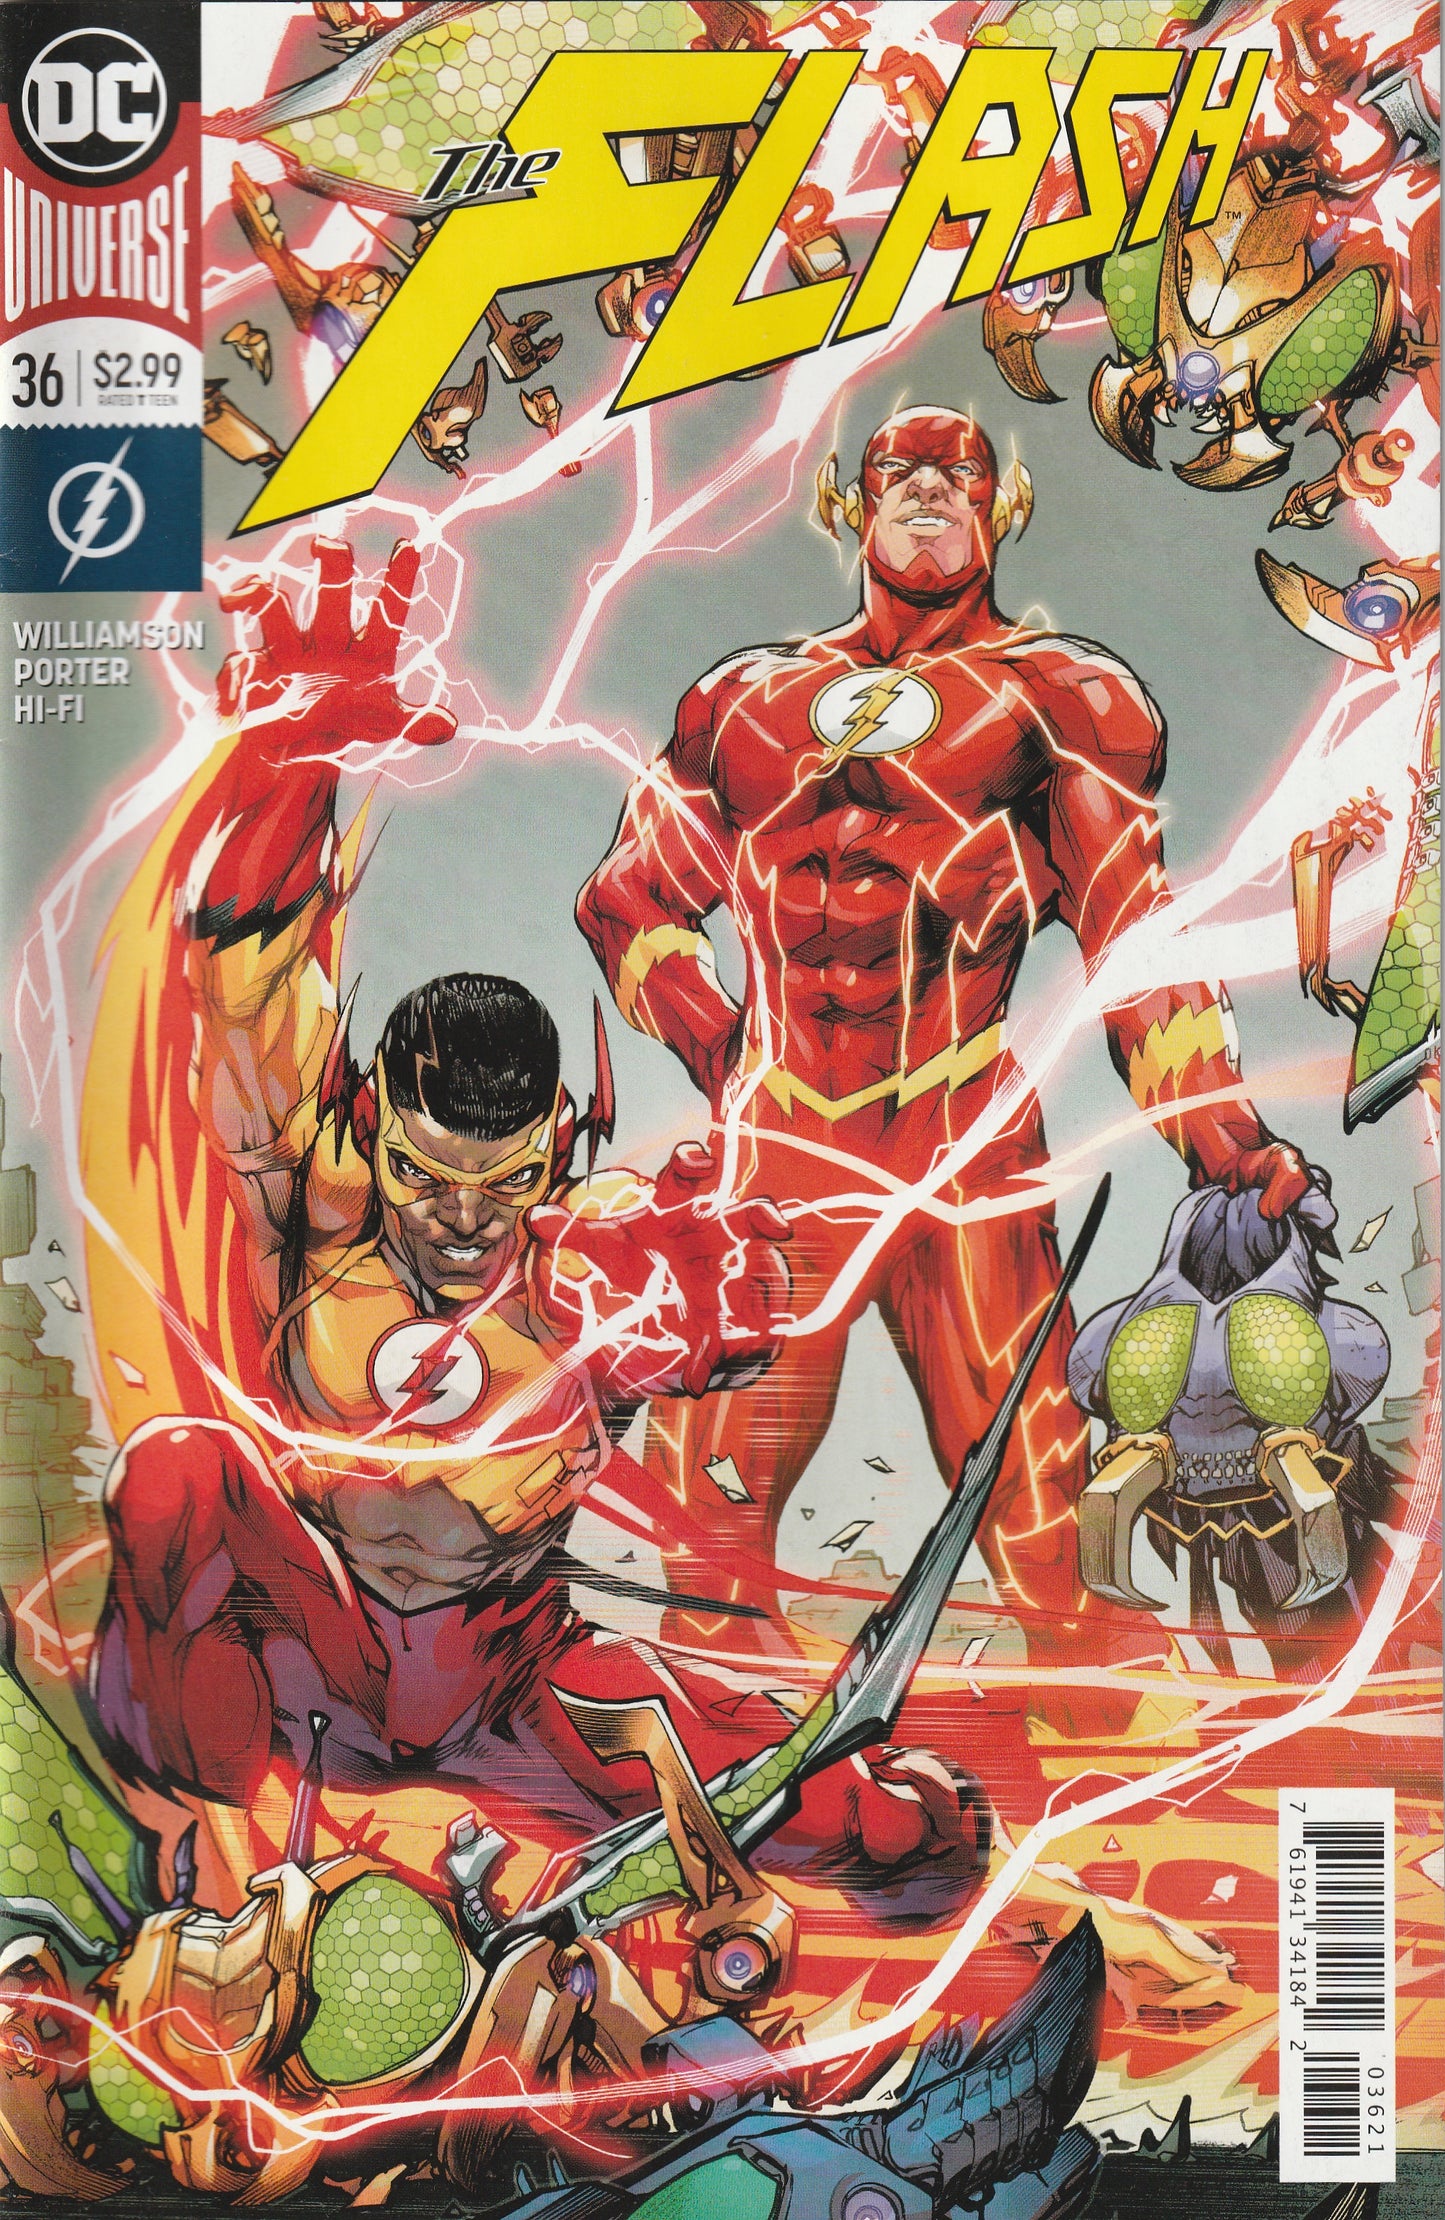 The Flash - Rebirth #36 (2018) - Howard Porter Variant Cover